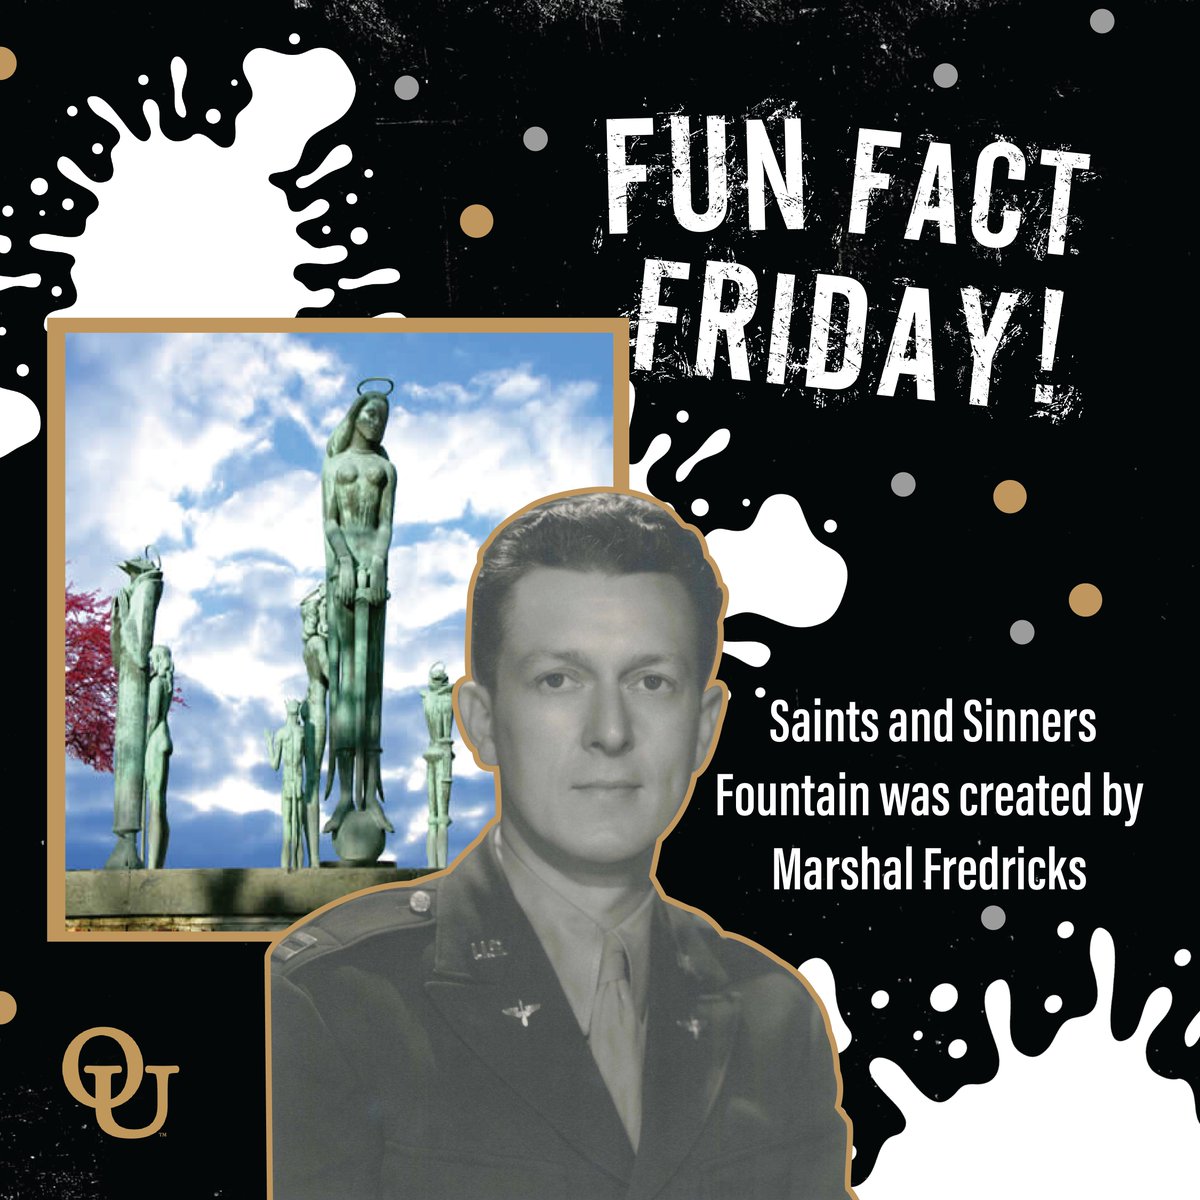 Fun Fact Friday! Did you know that OU is home to the Saints and Sinners Fountain which was sculpted by Marshal Fredricks. He also sculpted the Spirit of Detroit statue in front of the Detroit Institute of the Arts. #FunFactFriday #ThisisOU